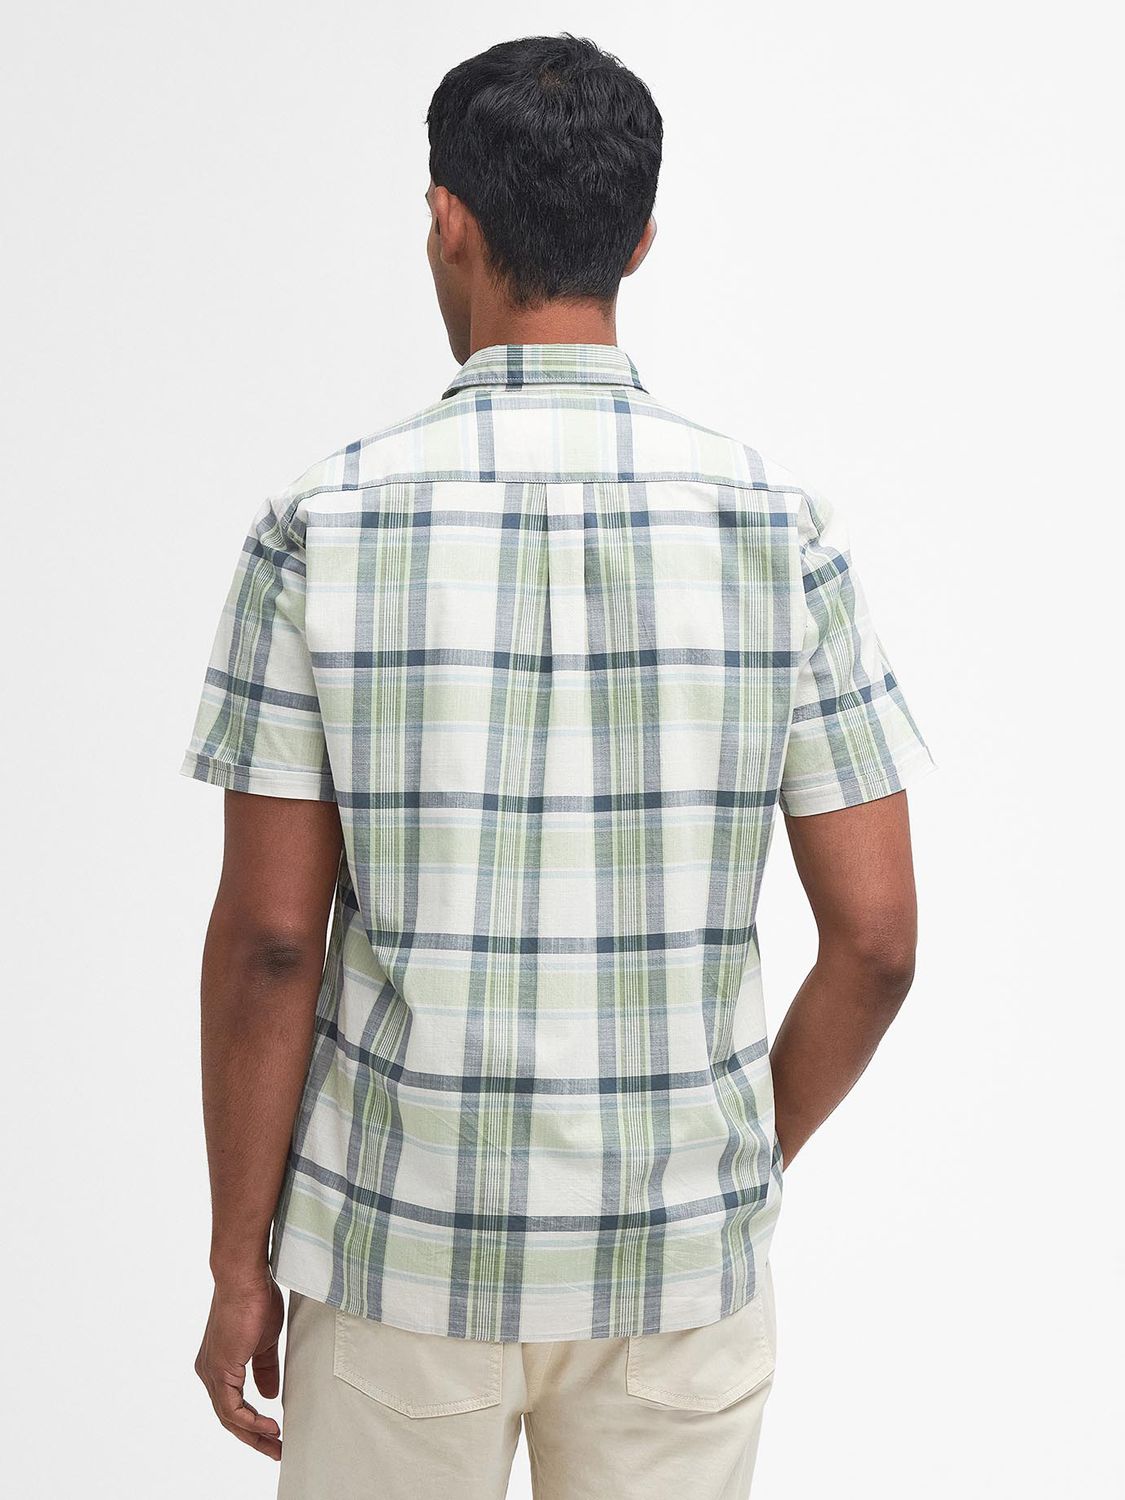 Barbour Rosewell Short Sleeve Check Shirt, Green/Multi, S